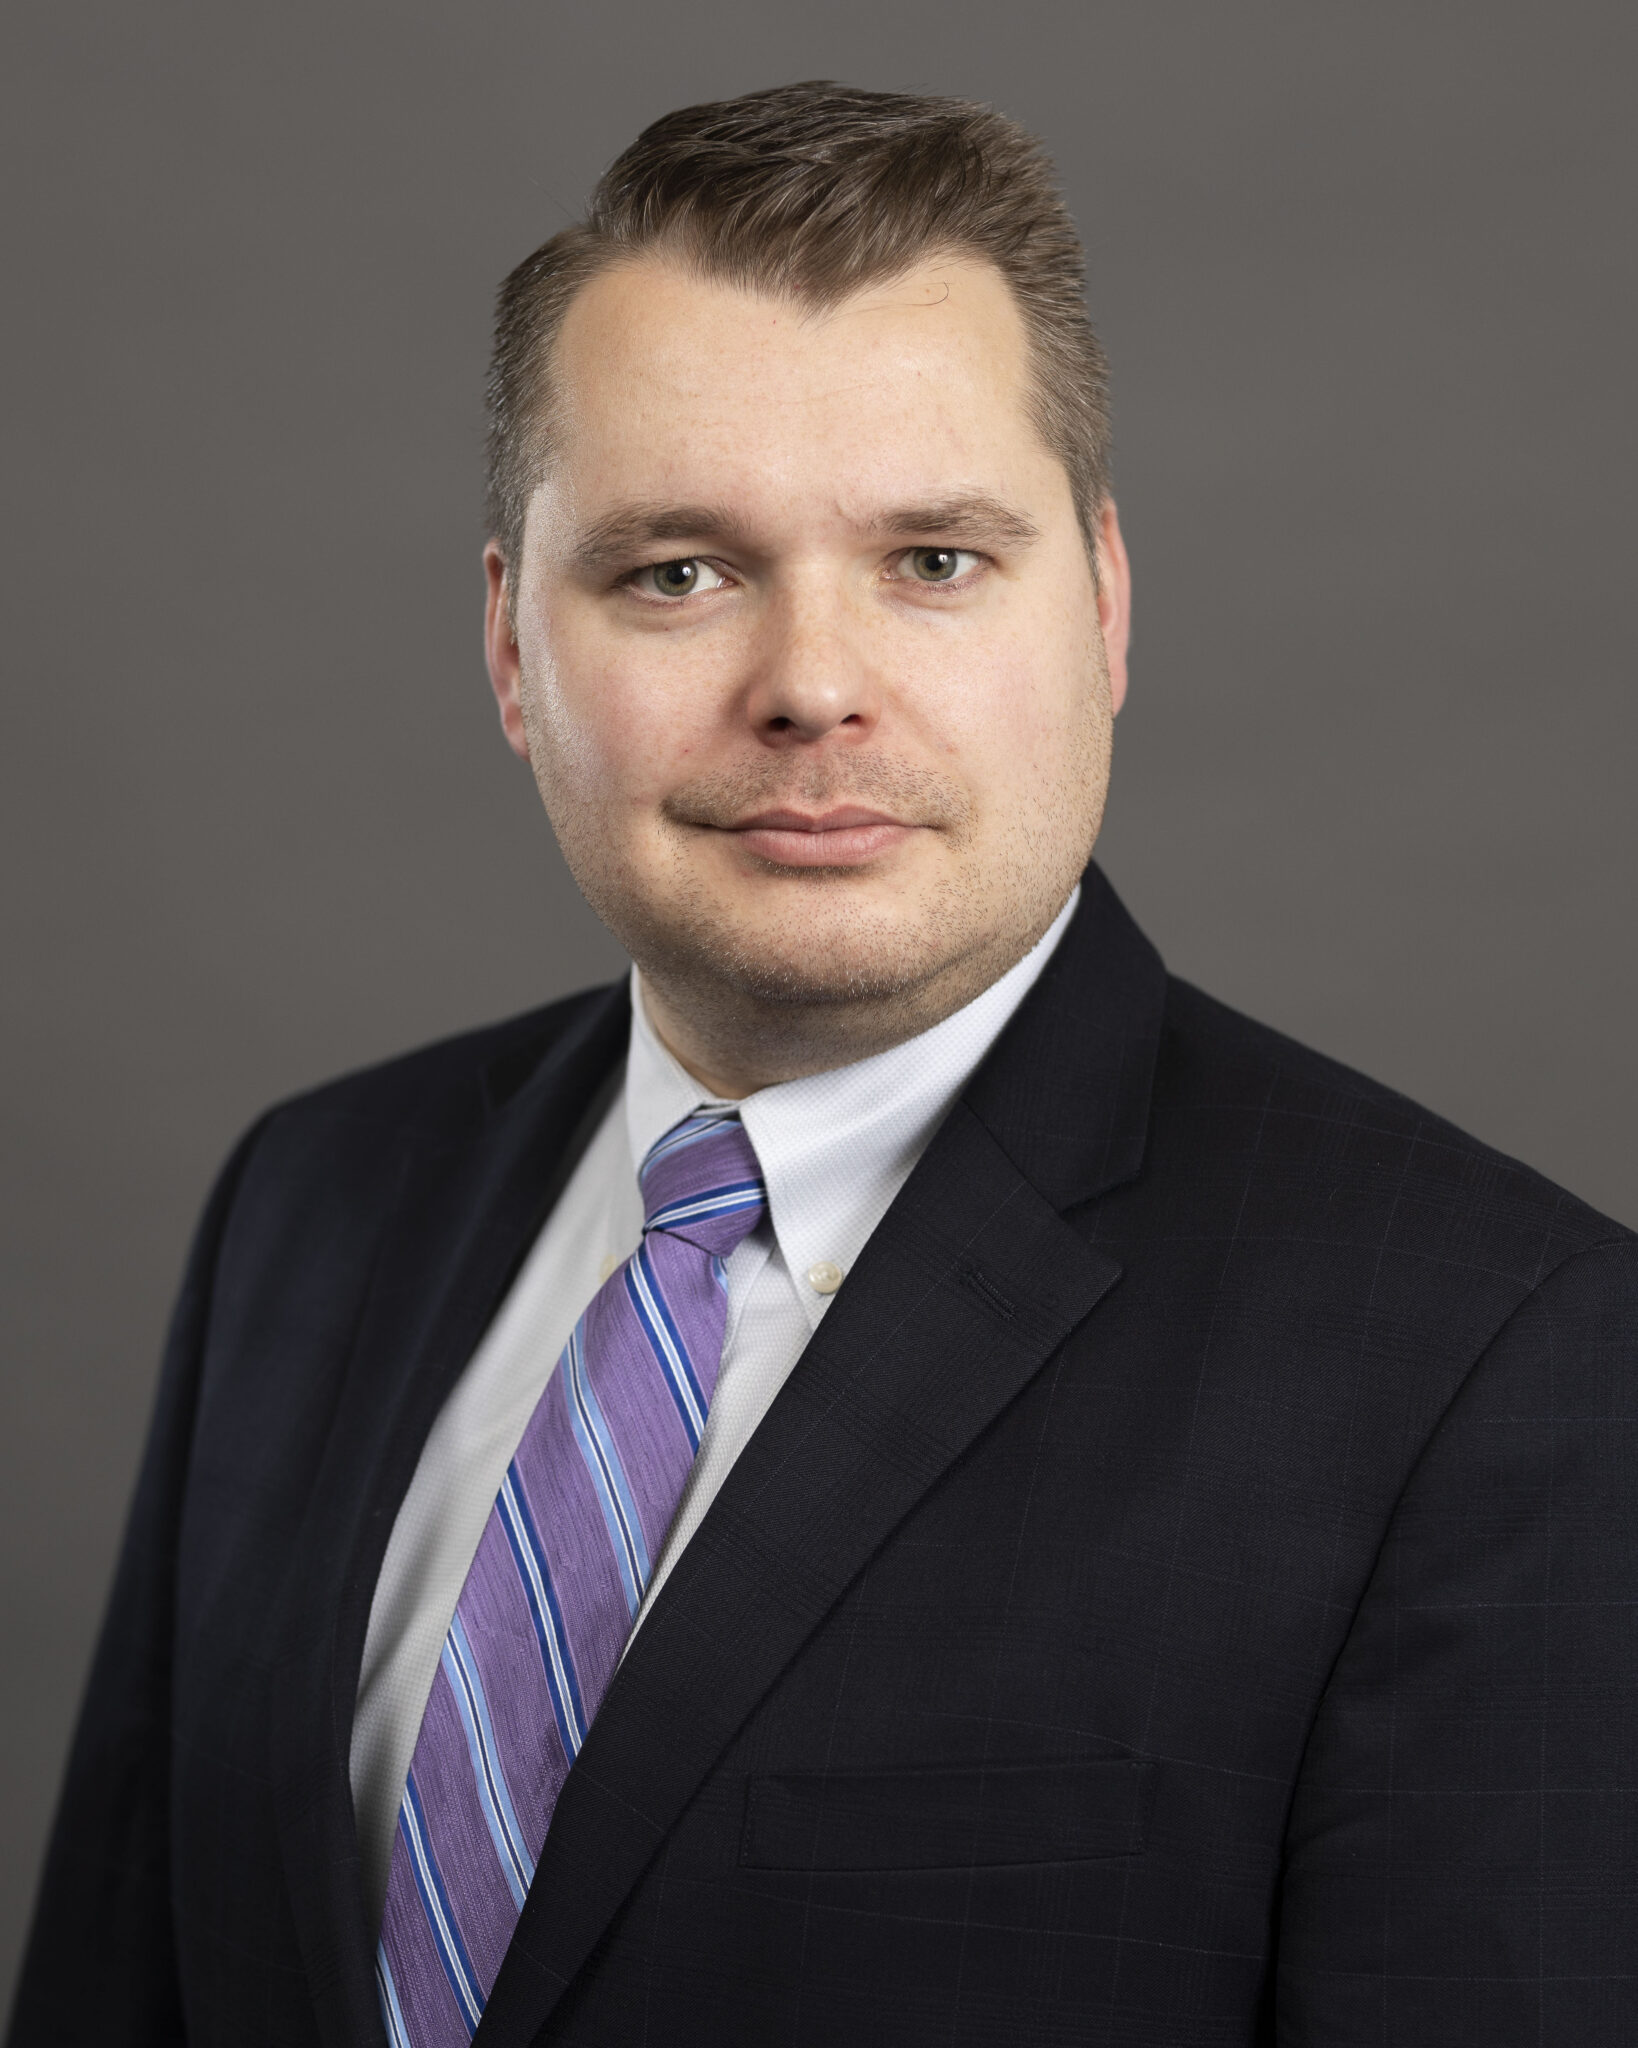 AAM Announces Promotion of Patryk Carwinski to Portfolio Manager - AAM ...